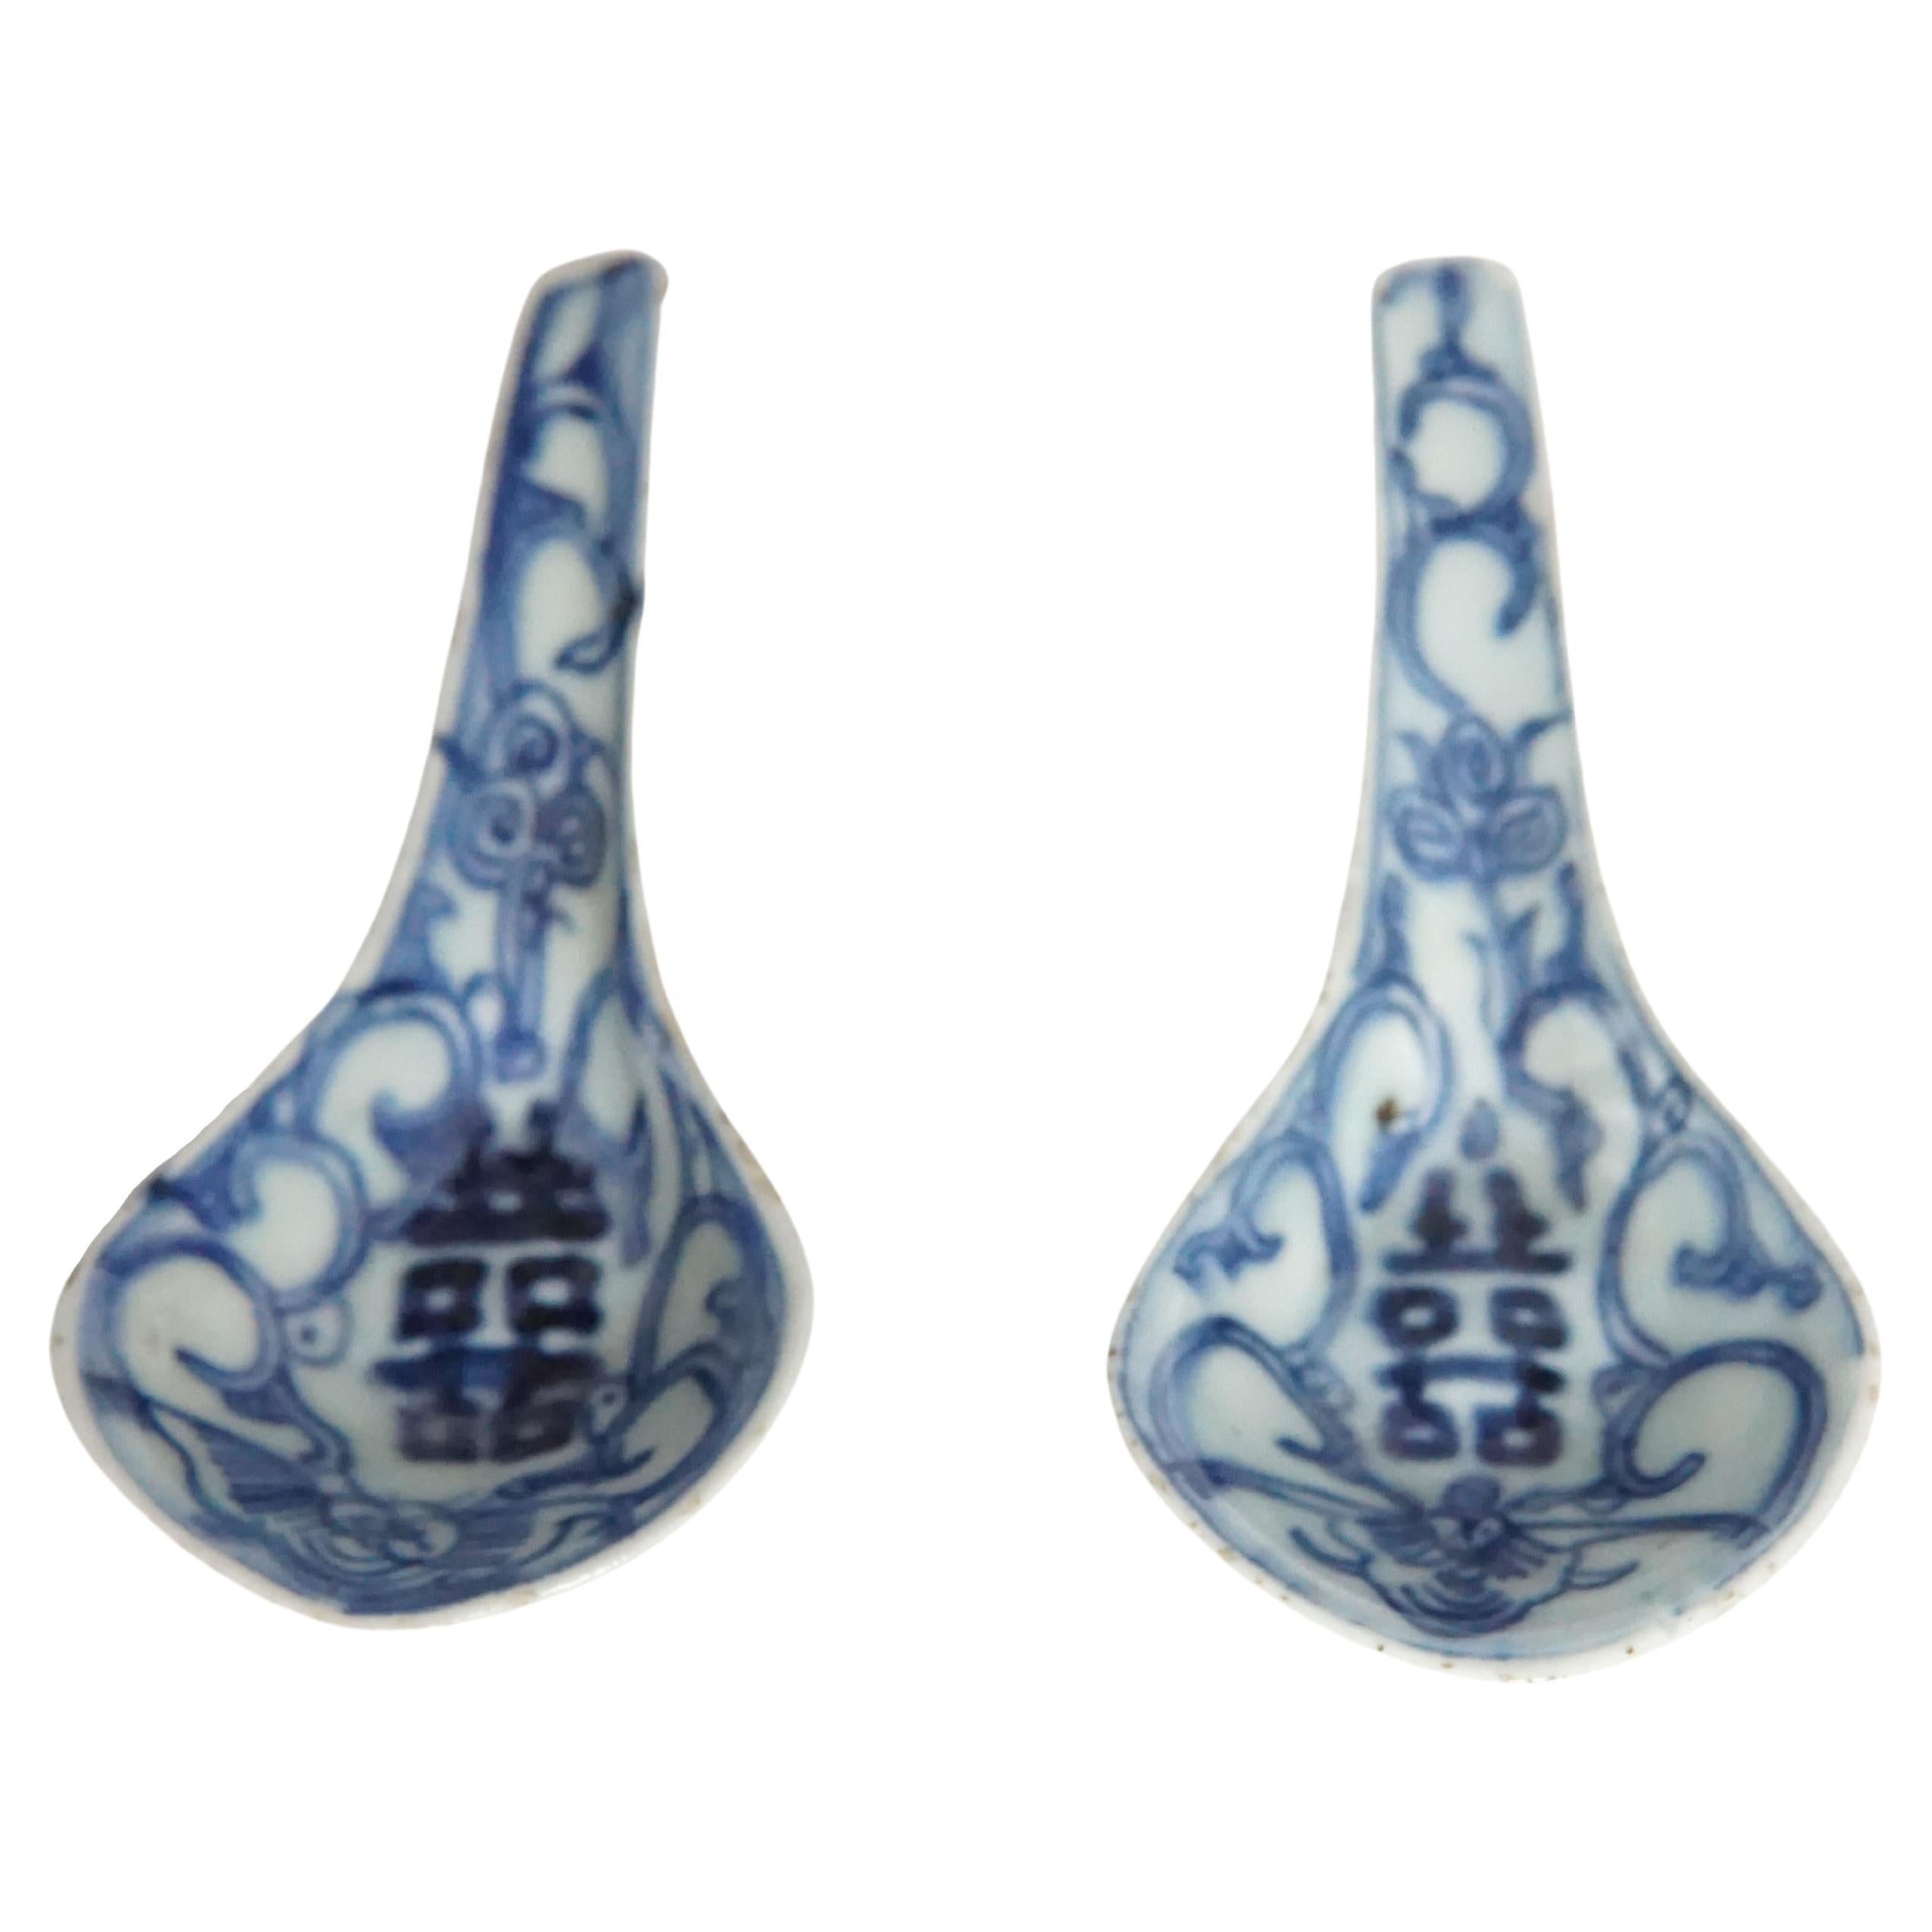 A wonderfully hand-painted pair of Chinese blue & white ceramic spoons circa 1850. They bear double happiness signs and wonderful, sculptural shape. A great piece of Chinese History. 
 